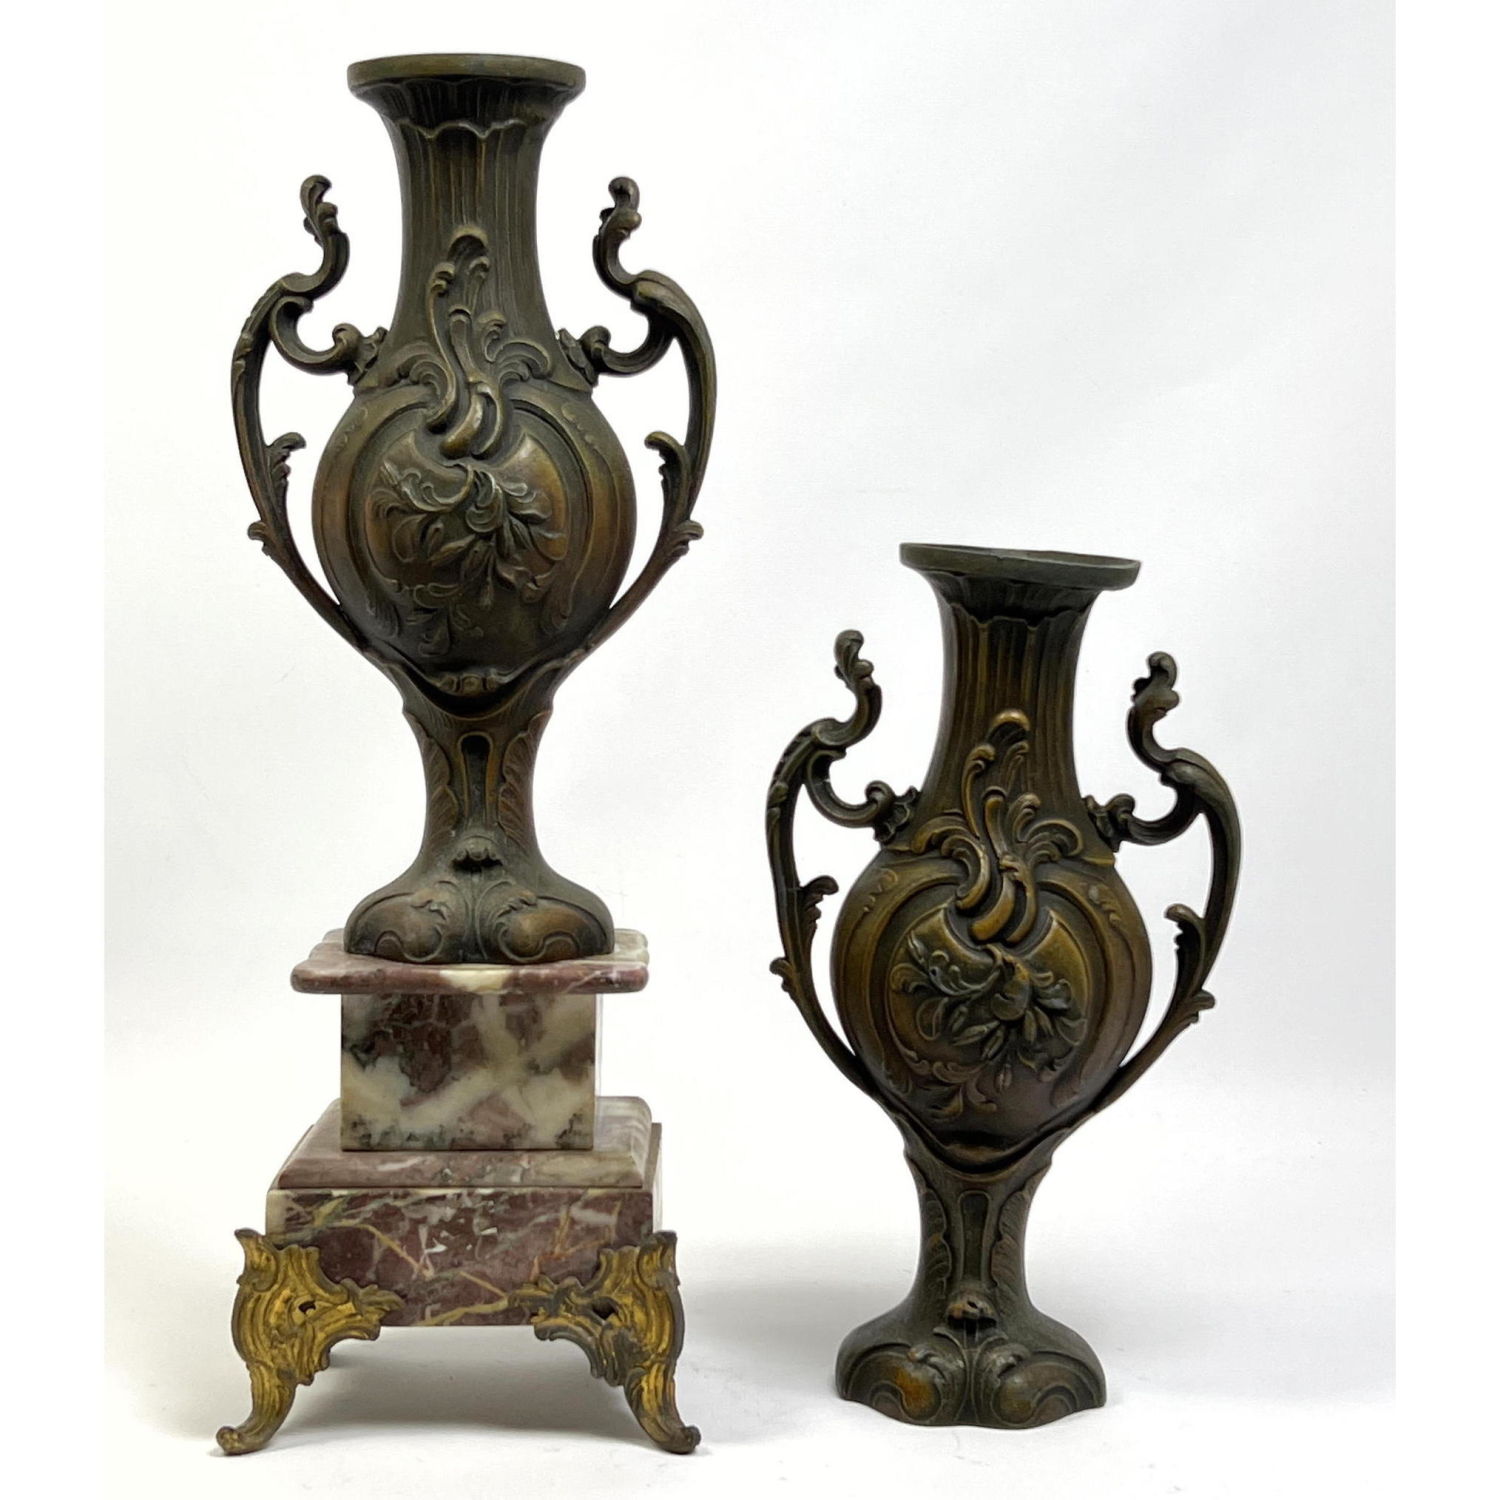 Two Decorative Handled Metal Urns.